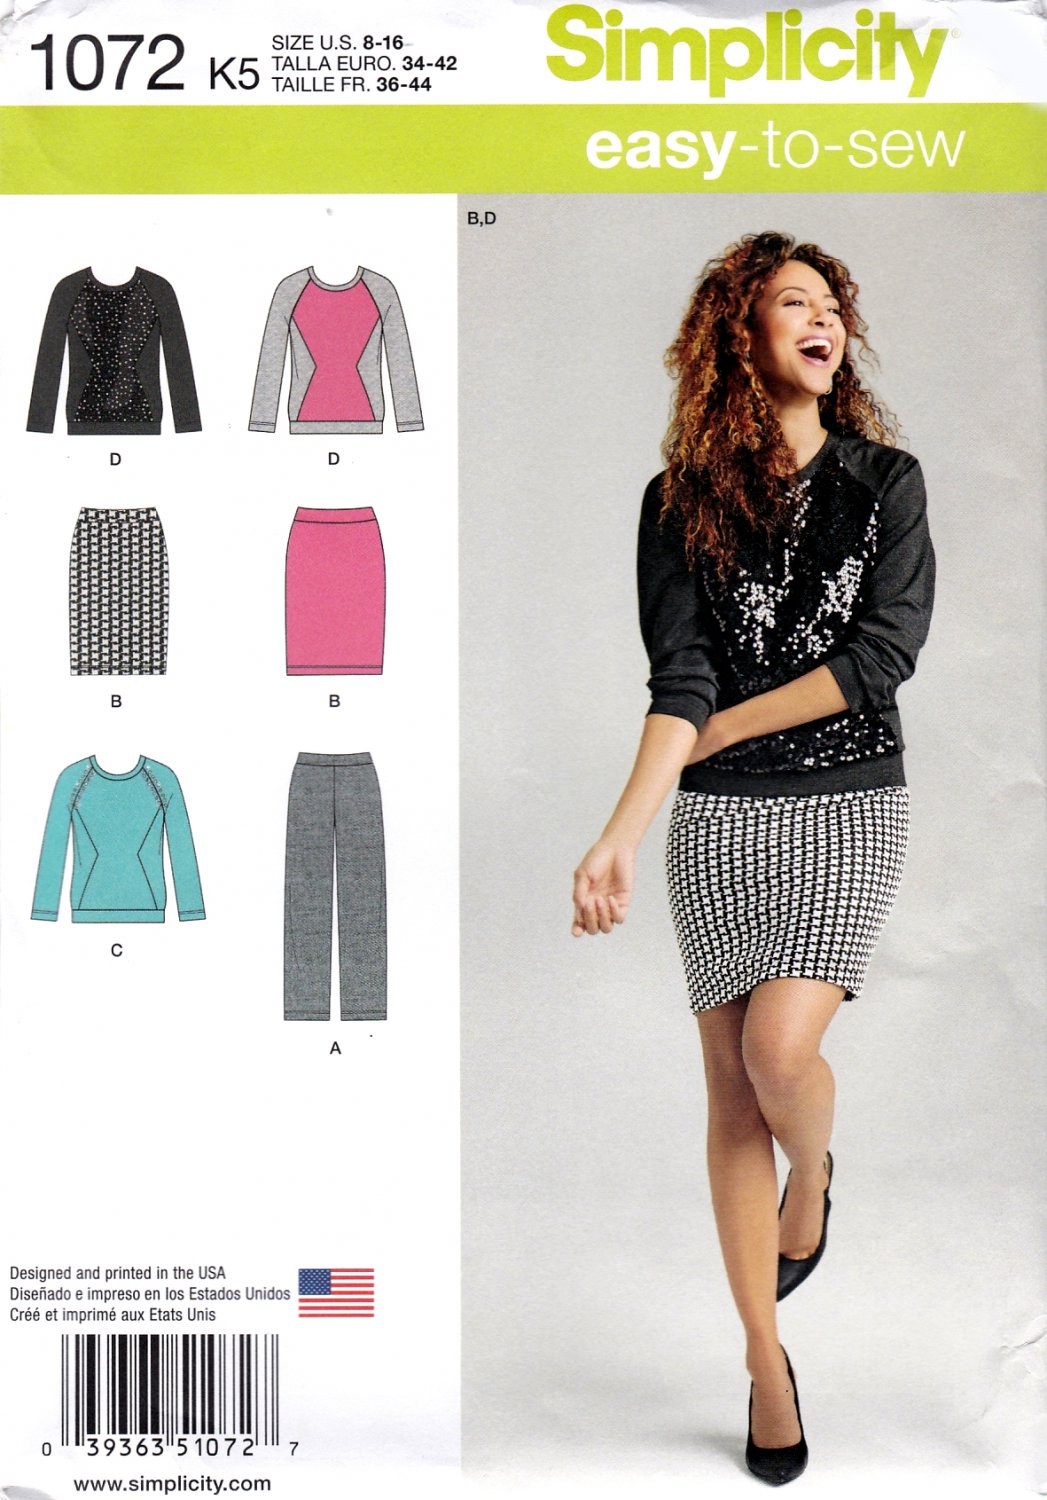 Simplicity 1072 Misses Knit Pants Skirt Top Sewing Pattern Sizes 8-16